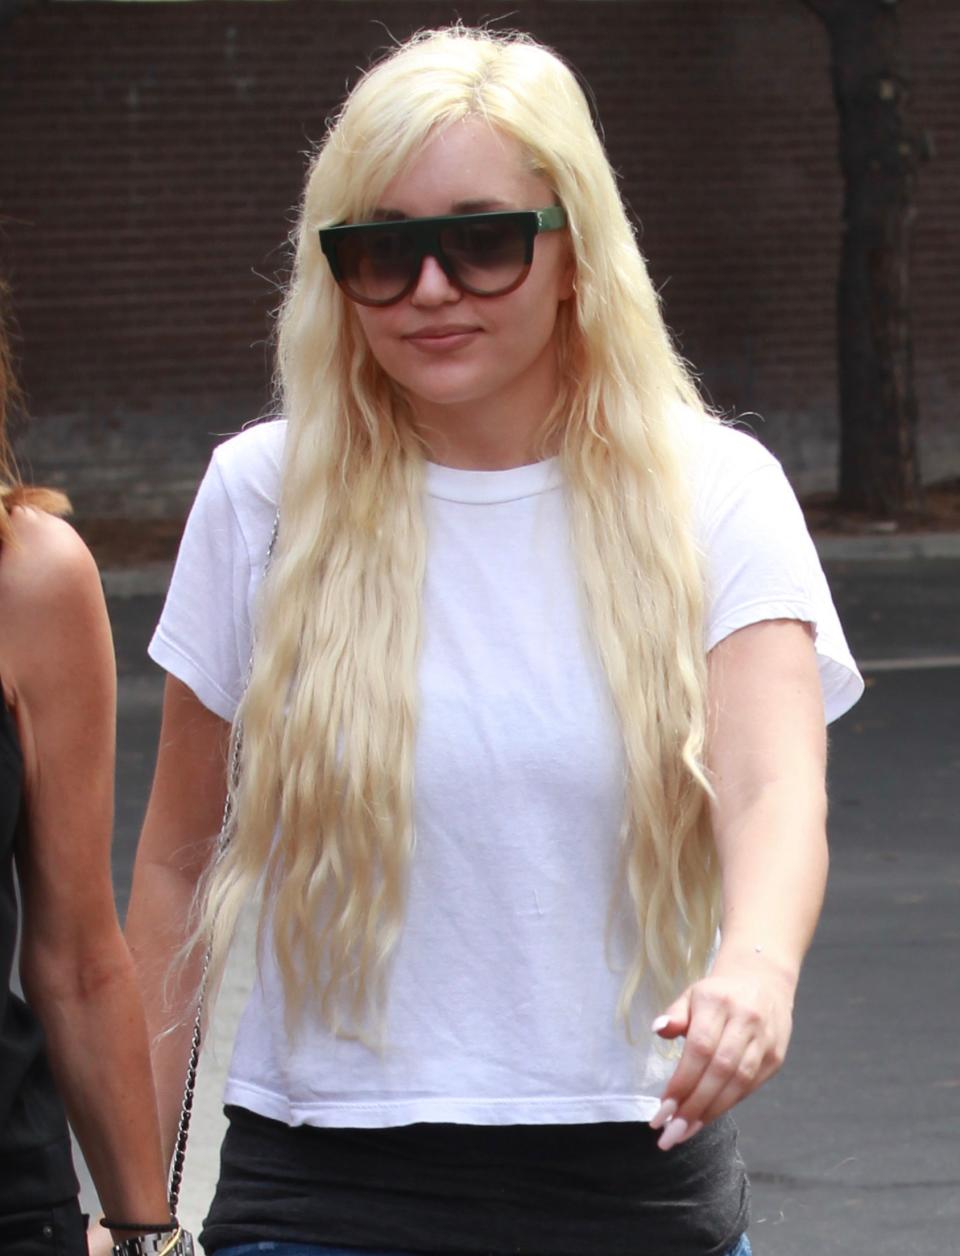 Amanda Bynes, in 2015, is reportedly receiving mental health treatment. (Photo: Bauer-Griffin/GC Images)